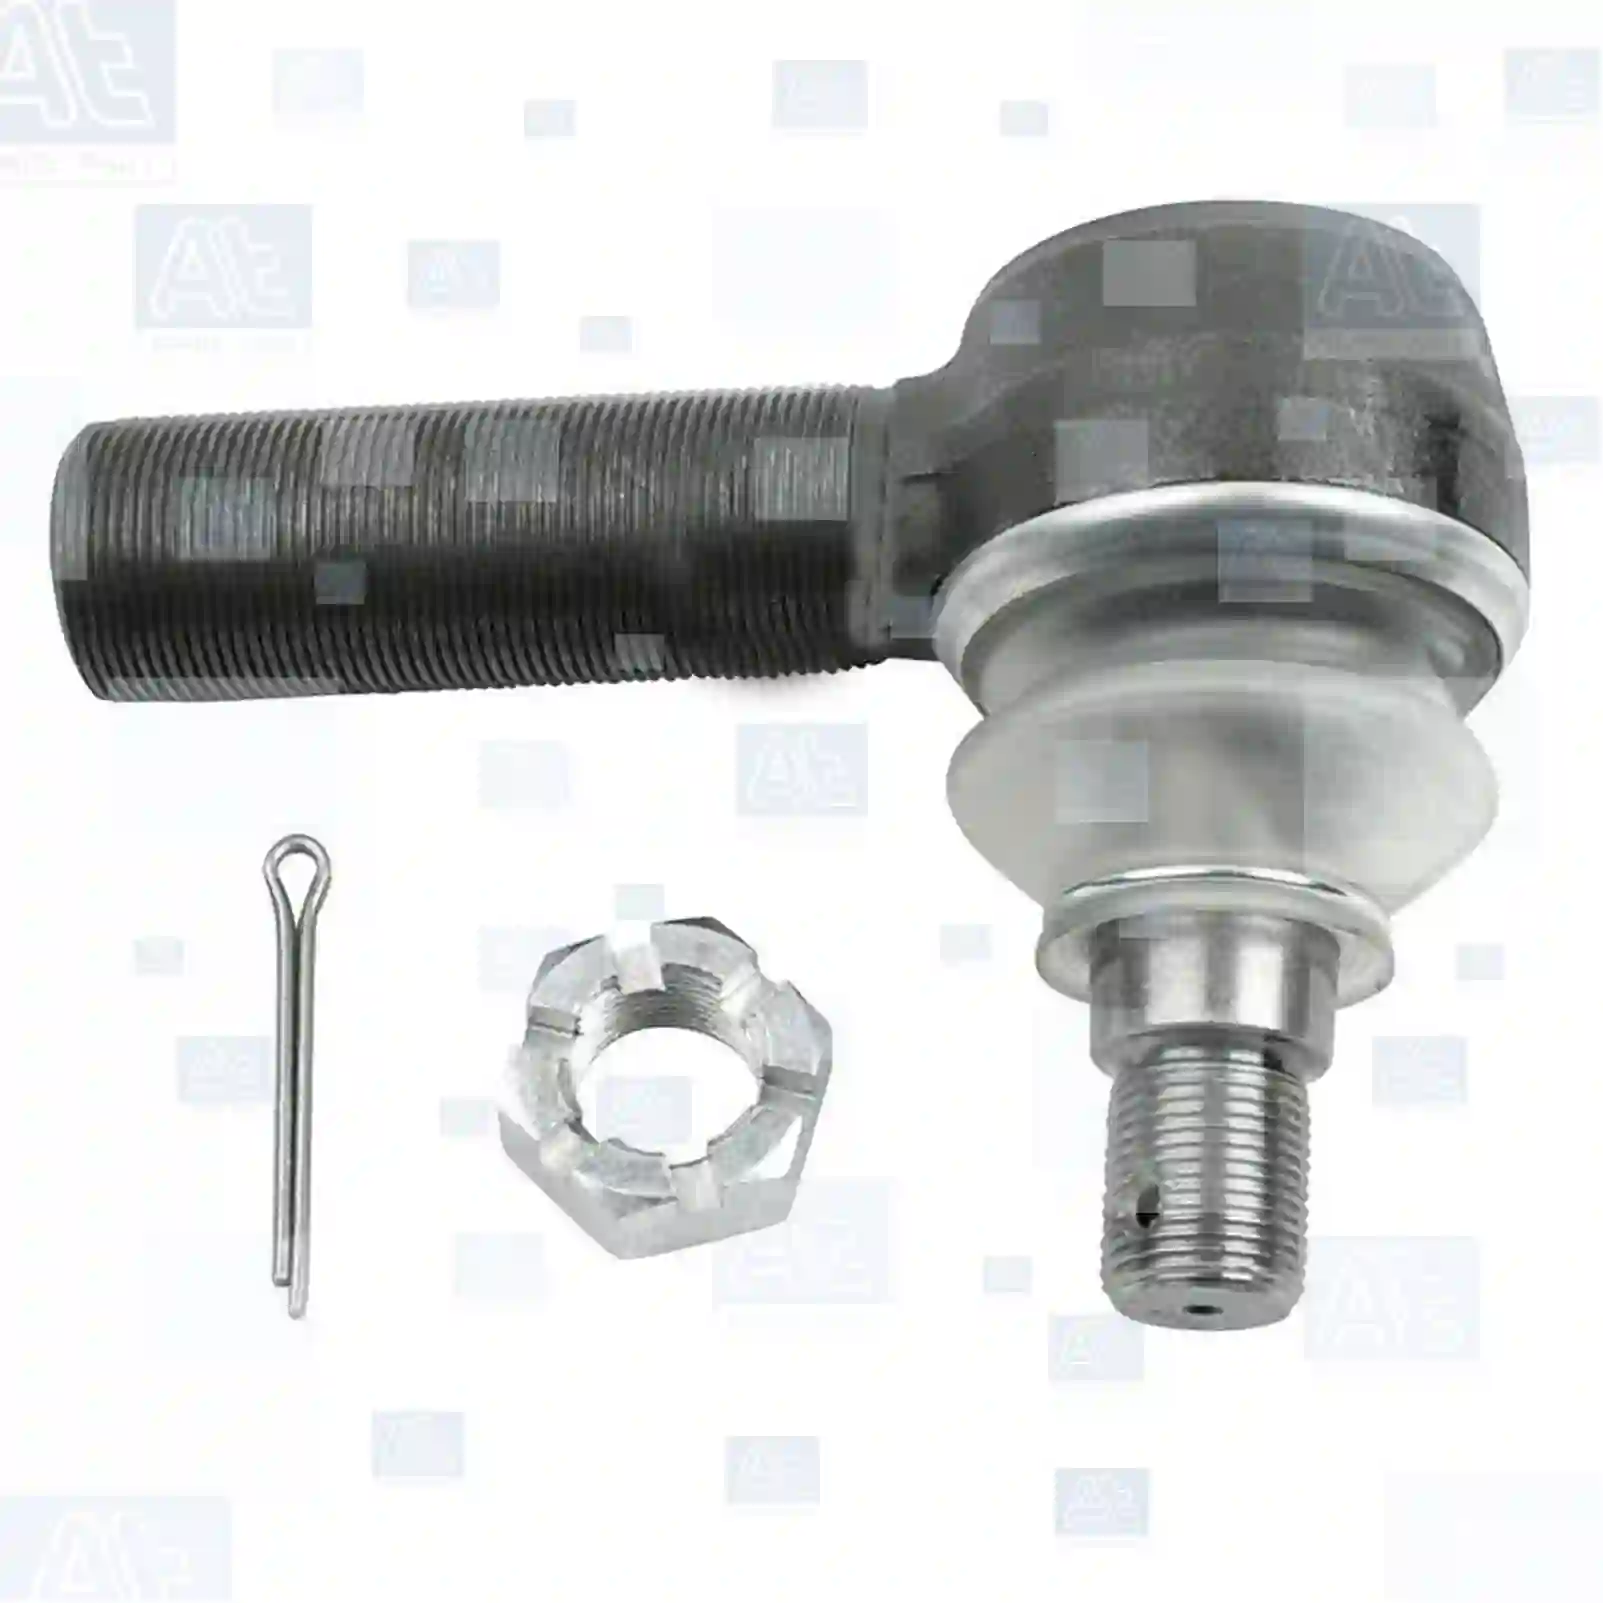 Ball joint, left hand thread, at no 77705145, oem no: 52RS000479, 0311300, 0607998, 1190653, 1315447, 1319838, 1332123, 1338714, 1401934, 1407394, 311300, 607998, 69513, ACHB063, ACHF241, MAK1295, 02980129, 02984511, 04833821, 04833828, 08122755, 42493782, 02980129, 02984511, 04833821, 04833828, 42493782, 81DB-3290-BA, 02980129, 02984511, 04833821, 04833828, 08122755, 2980129, 2984511, 42493782, 4833821, 4833828, 5949890761, 820352213, 8122755, 81953010013, 81953010074, 81953010082, 81953013107, 81953013113, 81953016055, 81953016068, 81953016074, 81953016163, 81953016273, 81953016283, 81953016320, 81953016361, 81953016380, 90804102216, 90804102612, 90804102720, 90804153107, 90804153113, 0003300035, 0003300148, 0013306635, 0013308835, 0014604048, 0014604348, 0014606448, 0024600248, 3023300035, 3023300135, 3023300235, 3023300335, 3453307235, 3453307435, 3503307135, 6851516000, 082192200, 082752400, 13C2505538BA, 16N3405517BA, 0003406213, 0003406218, 5000242467, 5000242488, 5000295215, 5000295336, 5000588470, 5000805280, 5000806187, 5000814347, 5000820879, 5000823654, 5001834533, 5001850550, 5001852263, 5001859984, 6851508000, 0820352213, 5611979, 3096212, 634301340, 1517647, 1695689, 1698839, 3096212, ZG40352-0008 At Spare Part | Engine, Accelerator Pedal, Camshaft, Connecting Rod, Crankcase, Crankshaft, Cylinder Head, Engine Suspension Mountings, Exhaust Manifold, Exhaust Gas Recirculation, Filter Kits, Flywheel Housing, General Overhaul Kits, Engine, Intake Manifold, Oil Cleaner, Oil Cooler, Oil Filter, Oil Pump, Oil Sump, Piston & Liner, Sensor & Switch, Timing Case, Turbocharger, Cooling System, Belt Tensioner, Coolant Filter, Coolant Pipe, Corrosion Prevention Agent, Drive, Expansion Tank, Fan, Intercooler, Monitors & Gauges, Radiator, Thermostat, V-Belt / Timing belt, Water Pump, Fuel System, Electronical Injector Unit, Feed Pump, Fuel Filter, cpl., Fuel Gauge Sender,  Fuel Line, Fuel Pump, Fuel Tank, Injection Line Kit, Injection Pump, Exhaust System, Clutch & Pedal, Gearbox, Propeller Shaft, Axles, Brake System, Hubs & Wheels, Suspension, Leaf Spring, Universal Parts / Accessories, Steering, Electrical System, Cabin Ball joint, left hand thread, at no 77705145, oem no: 52RS000479, 0311300, 0607998, 1190653, 1315447, 1319838, 1332123, 1338714, 1401934, 1407394, 311300, 607998, 69513, ACHB063, ACHF241, MAK1295, 02980129, 02984511, 04833821, 04833828, 08122755, 42493782, 02980129, 02984511, 04833821, 04833828, 42493782, 81DB-3290-BA, 02980129, 02984511, 04833821, 04833828, 08122755, 2980129, 2984511, 42493782, 4833821, 4833828, 5949890761, 820352213, 8122755, 81953010013, 81953010074, 81953010082, 81953013107, 81953013113, 81953016055, 81953016068, 81953016074, 81953016163, 81953016273, 81953016283, 81953016320, 81953016361, 81953016380, 90804102216, 90804102612, 90804102720, 90804153107, 90804153113, 0003300035, 0003300148, 0013306635, 0013308835, 0014604048, 0014604348, 0014606448, 0024600248, 3023300035, 3023300135, 3023300235, 3023300335, 3453307235, 3453307435, 3503307135, 6851516000, 082192200, 082752400, 13C2505538BA, 16N3405517BA, 0003406213, 0003406218, 5000242467, 5000242488, 5000295215, 5000295336, 5000588470, 5000805280, 5000806187, 5000814347, 5000820879, 5000823654, 5001834533, 5001850550, 5001852263, 5001859984, 6851508000, 0820352213, 5611979, 3096212, 634301340, 1517647, 1695689, 1698839, 3096212, ZG40352-0008 At Spare Part | Engine, Accelerator Pedal, Camshaft, Connecting Rod, Crankcase, Crankshaft, Cylinder Head, Engine Suspension Mountings, Exhaust Manifold, Exhaust Gas Recirculation, Filter Kits, Flywheel Housing, General Overhaul Kits, Engine, Intake Manifold, Oil Cleaner, Oil Cooler, Oil Filter, Oil Pump, Oil Sump, Piston & Liner, Sensor & Switch, Timing Case, Turbocharger, Cooling System, Belt Tensioner, Coolant Filter, Coolant Pipe, Corrosion Prevention Agent, Drive, Expansion Tank, Fan, Intercooler, Monitors & Gauges, Radiator, Thermostat, V-Belt / Timing belt, Water Pump, Fuel System, Electronical Injector Unit, Feed Pump, Fuel Filter, cpl., Fuel Gauge Sender,  Fuel Line, Fuel Pump, Fuel Tank, Injection Line Kit, Injection Pump, Exhaust System, Clutch & Pedal, Gearbox, Propeller Shaft, Axles, Brake System, Hubs & Wheels, Suspension, Leaf Spring, Universal Parts / Accessories, Steering, Electrical System, Cabin